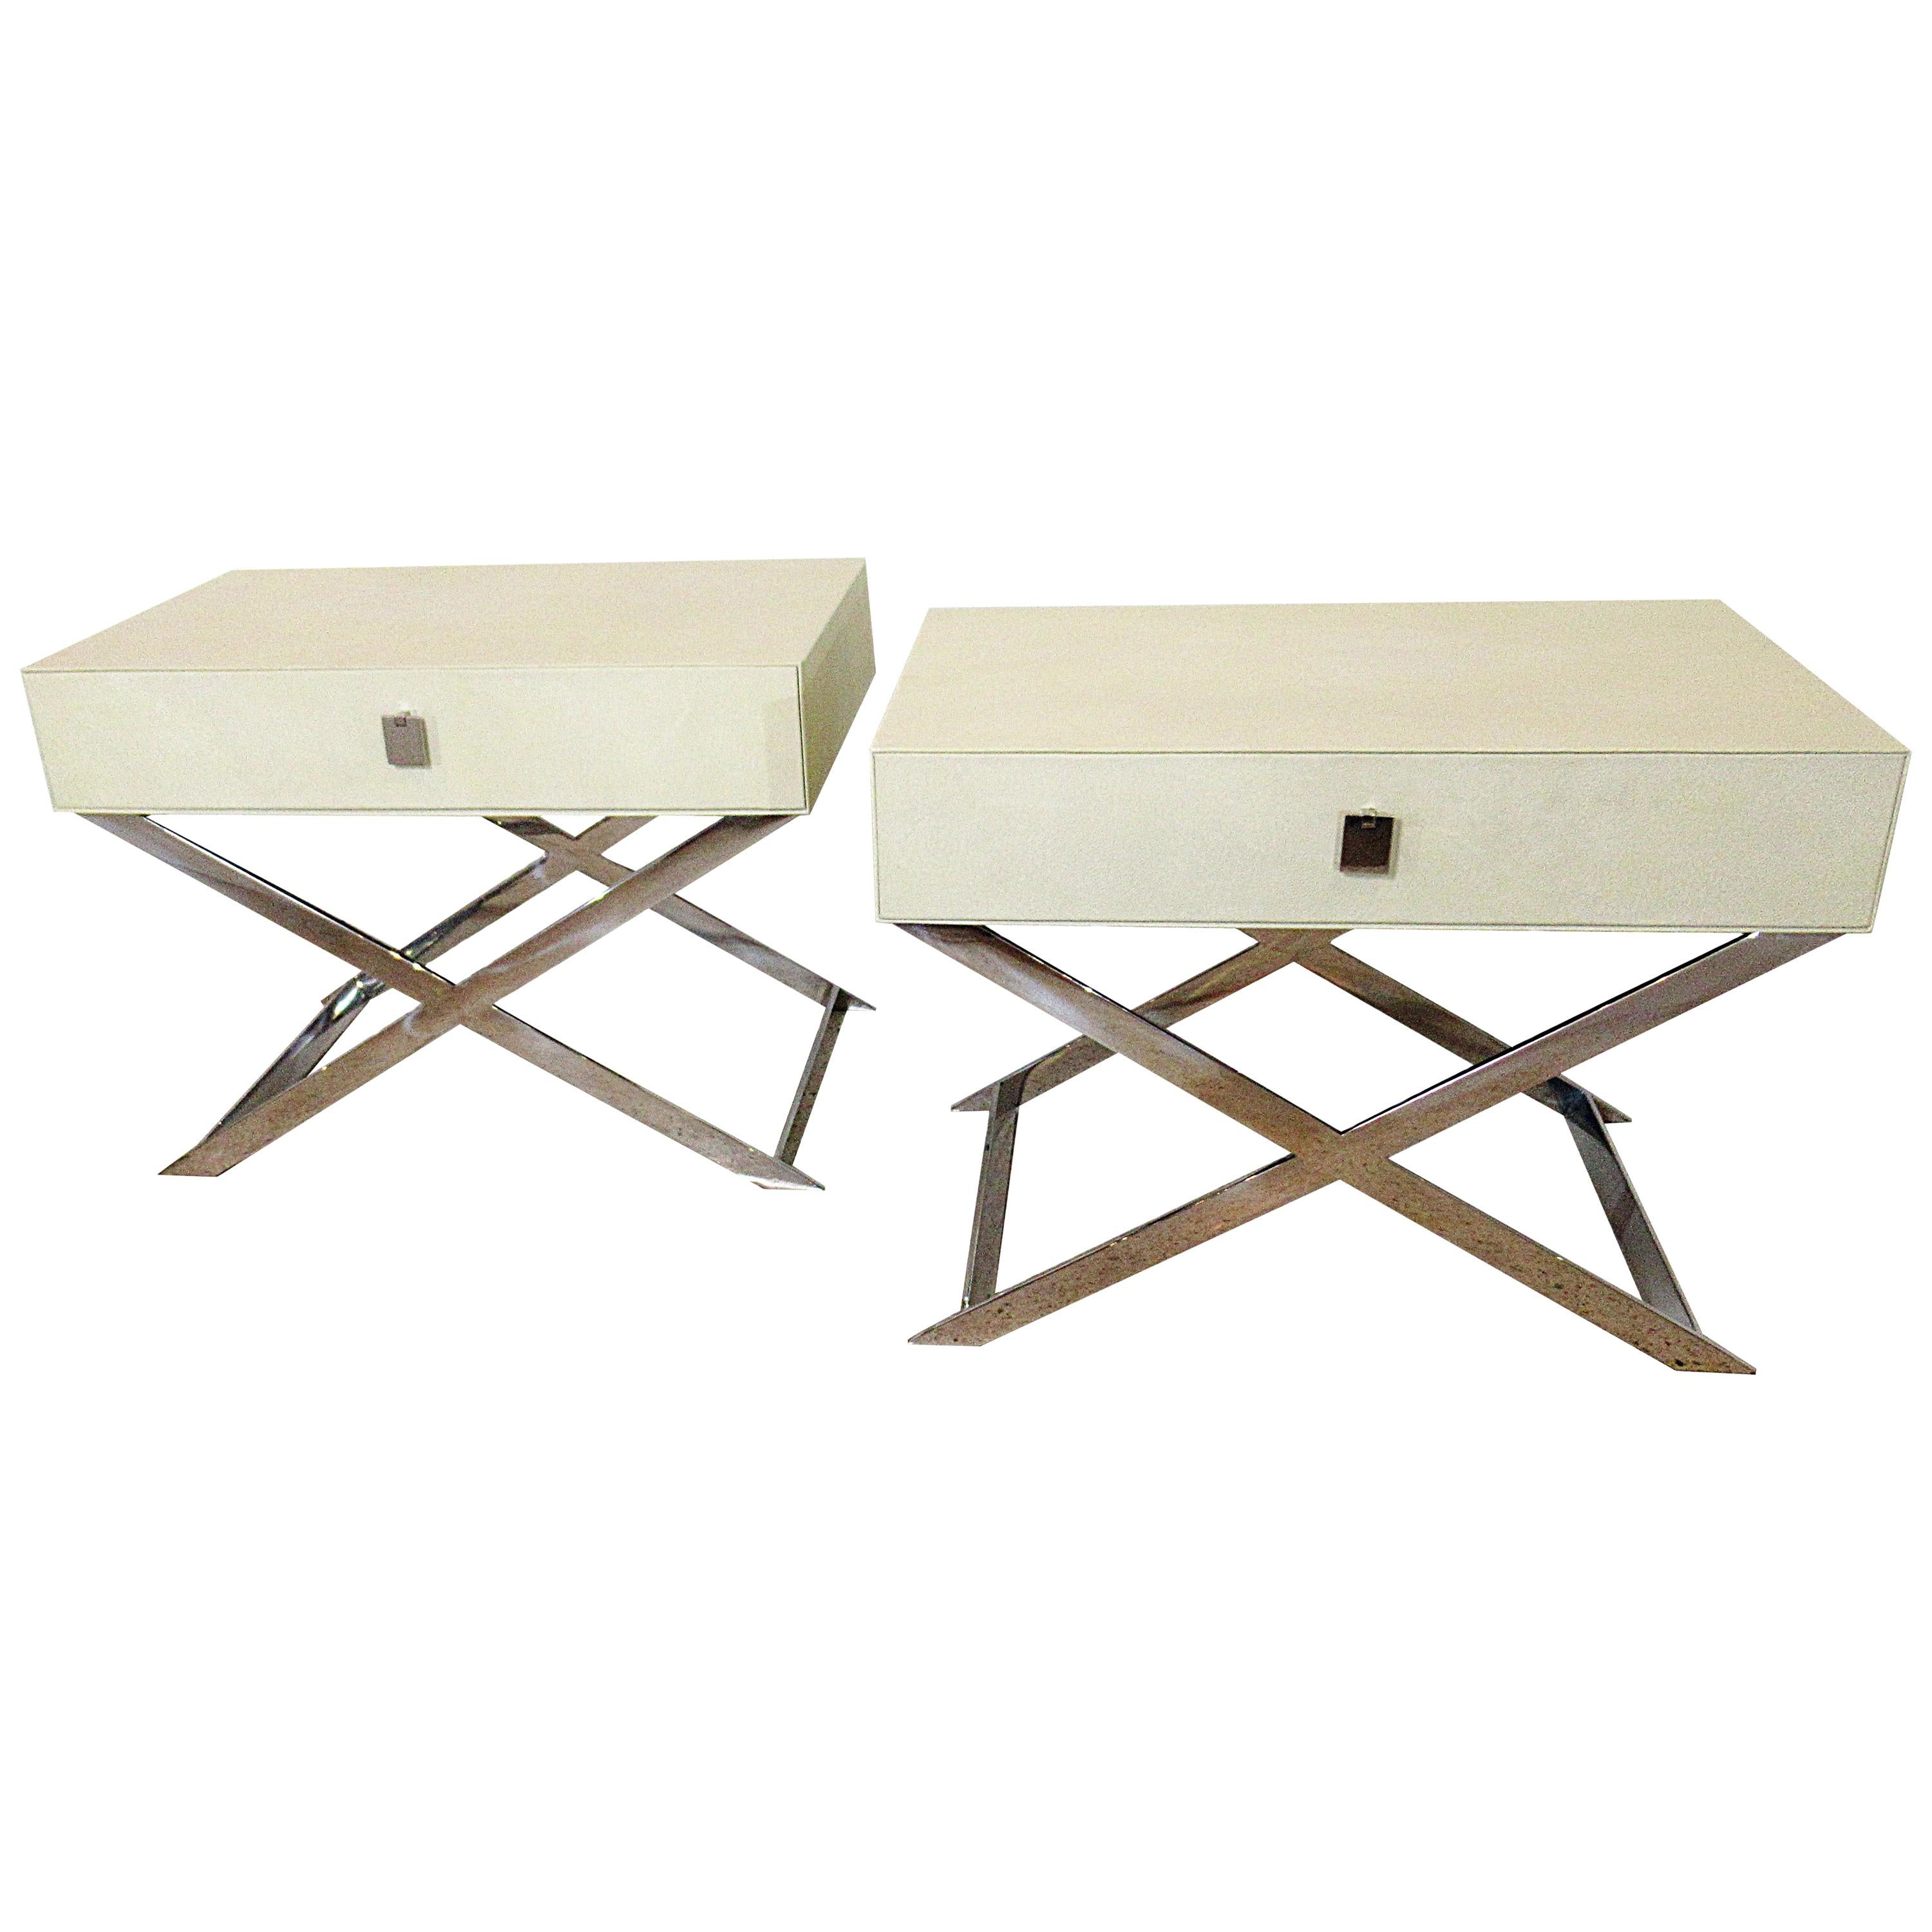 Pair of Faux Shagreen & Chrome Bedside or Side Tables in Jean Michel Frank Style